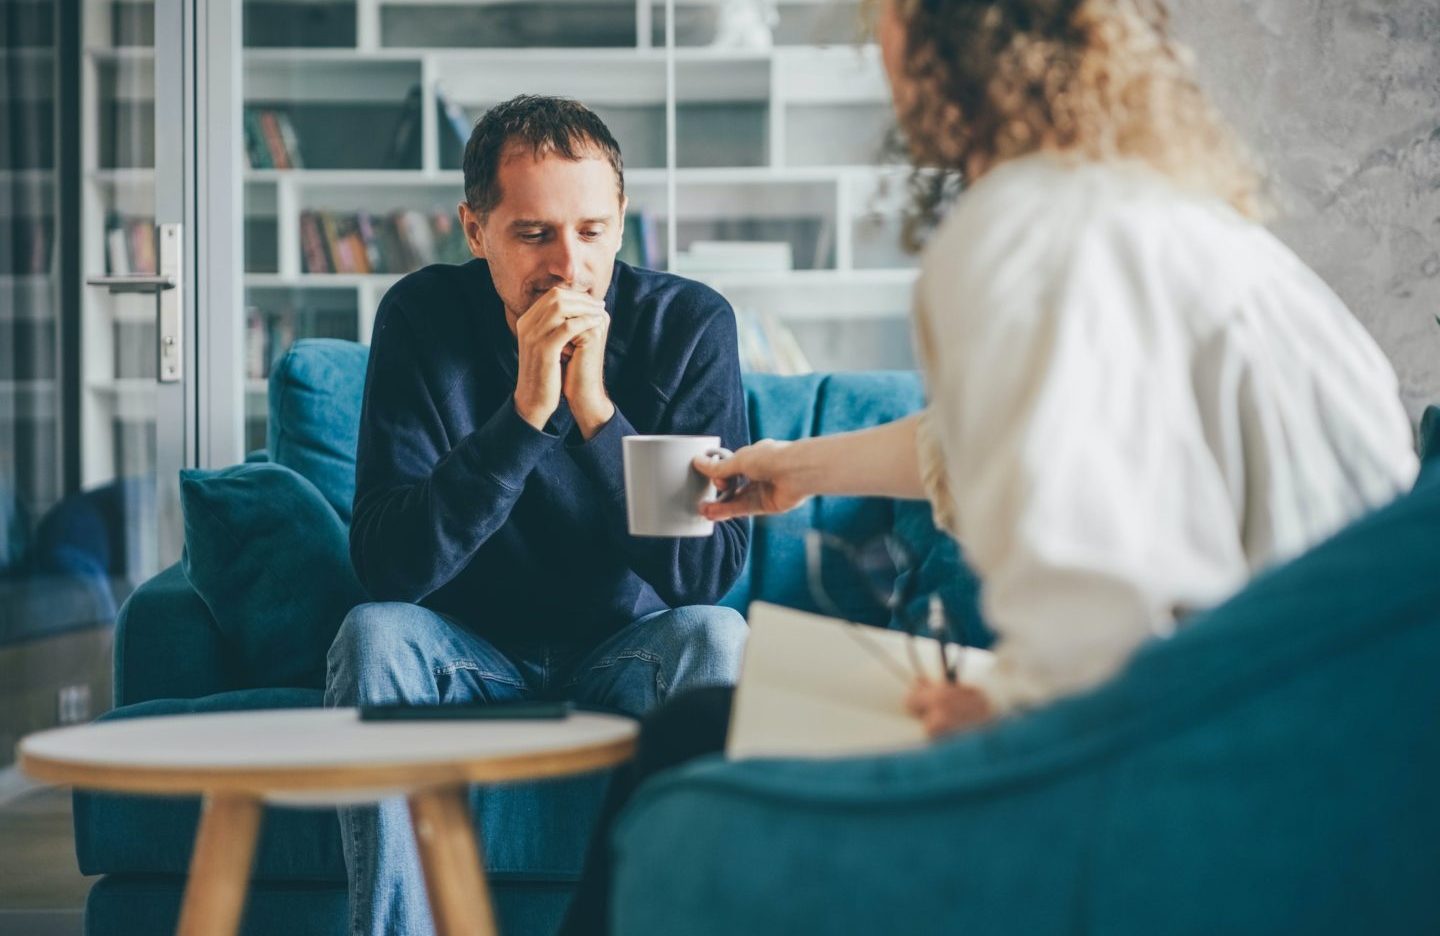 Curly haired woman consultant offers cup of coffee to stressed man client